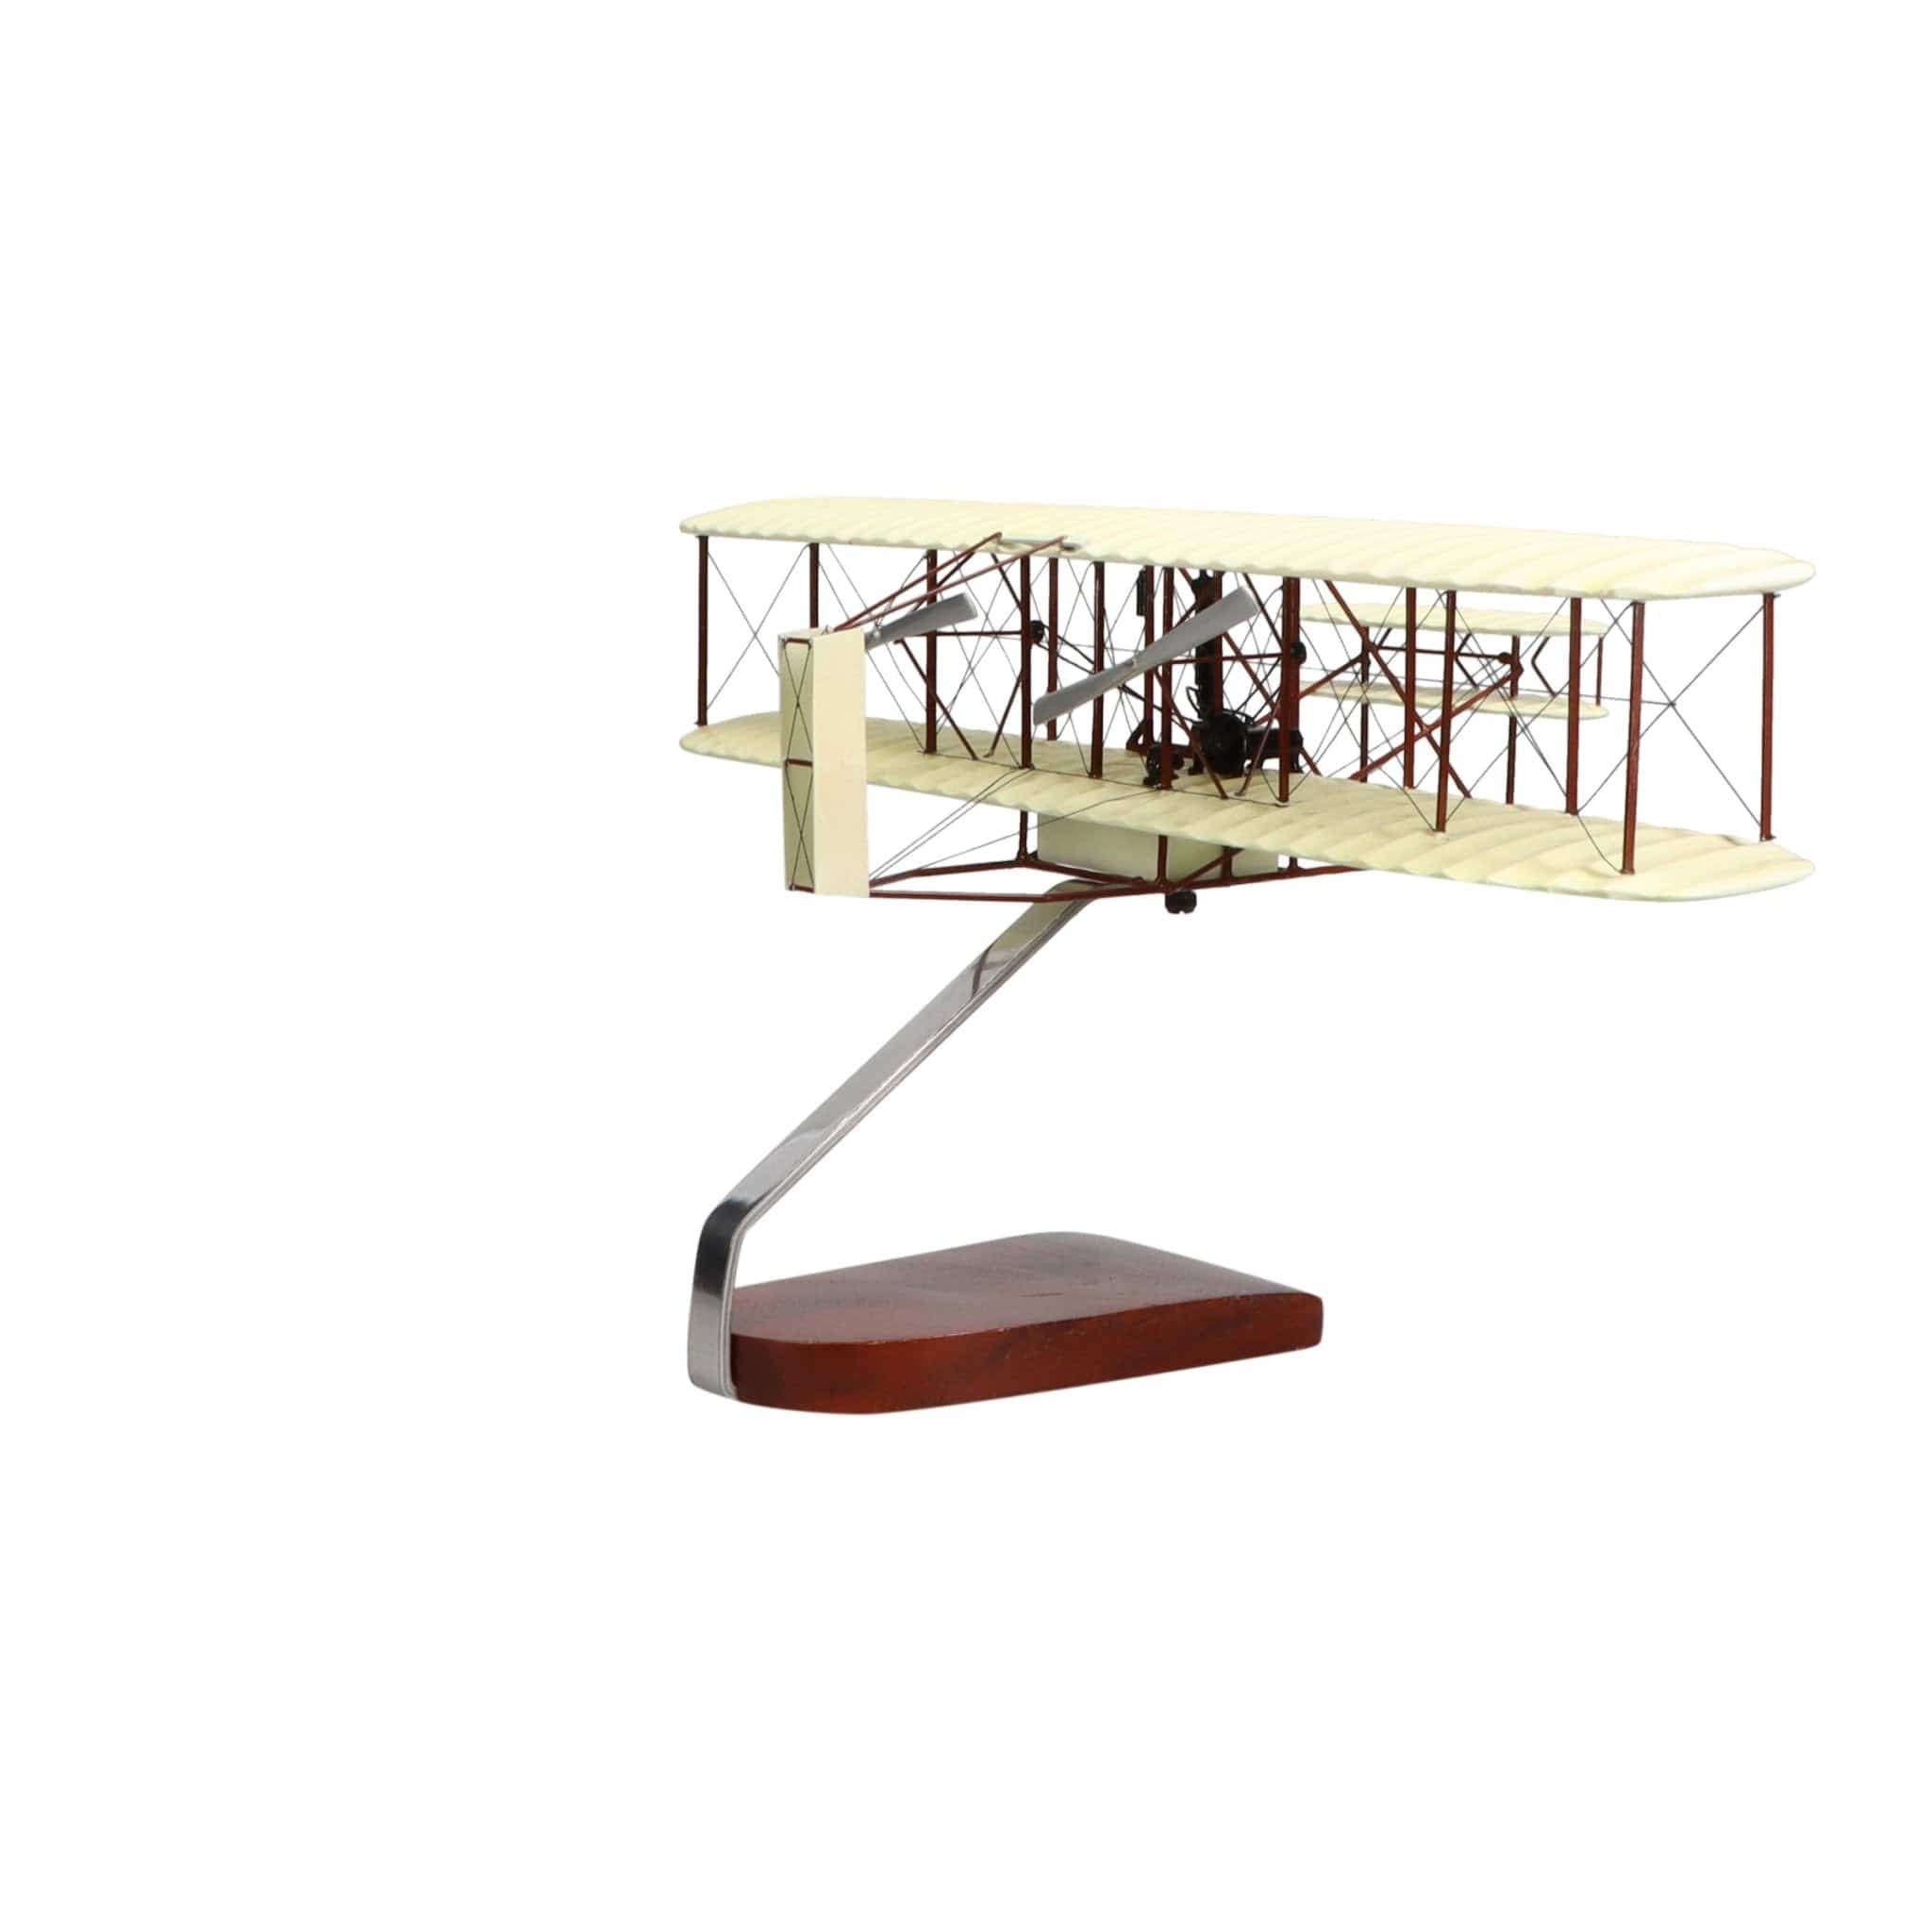 Wright Flyer "Orville and Wilbur Wright" Large Mahogany Model